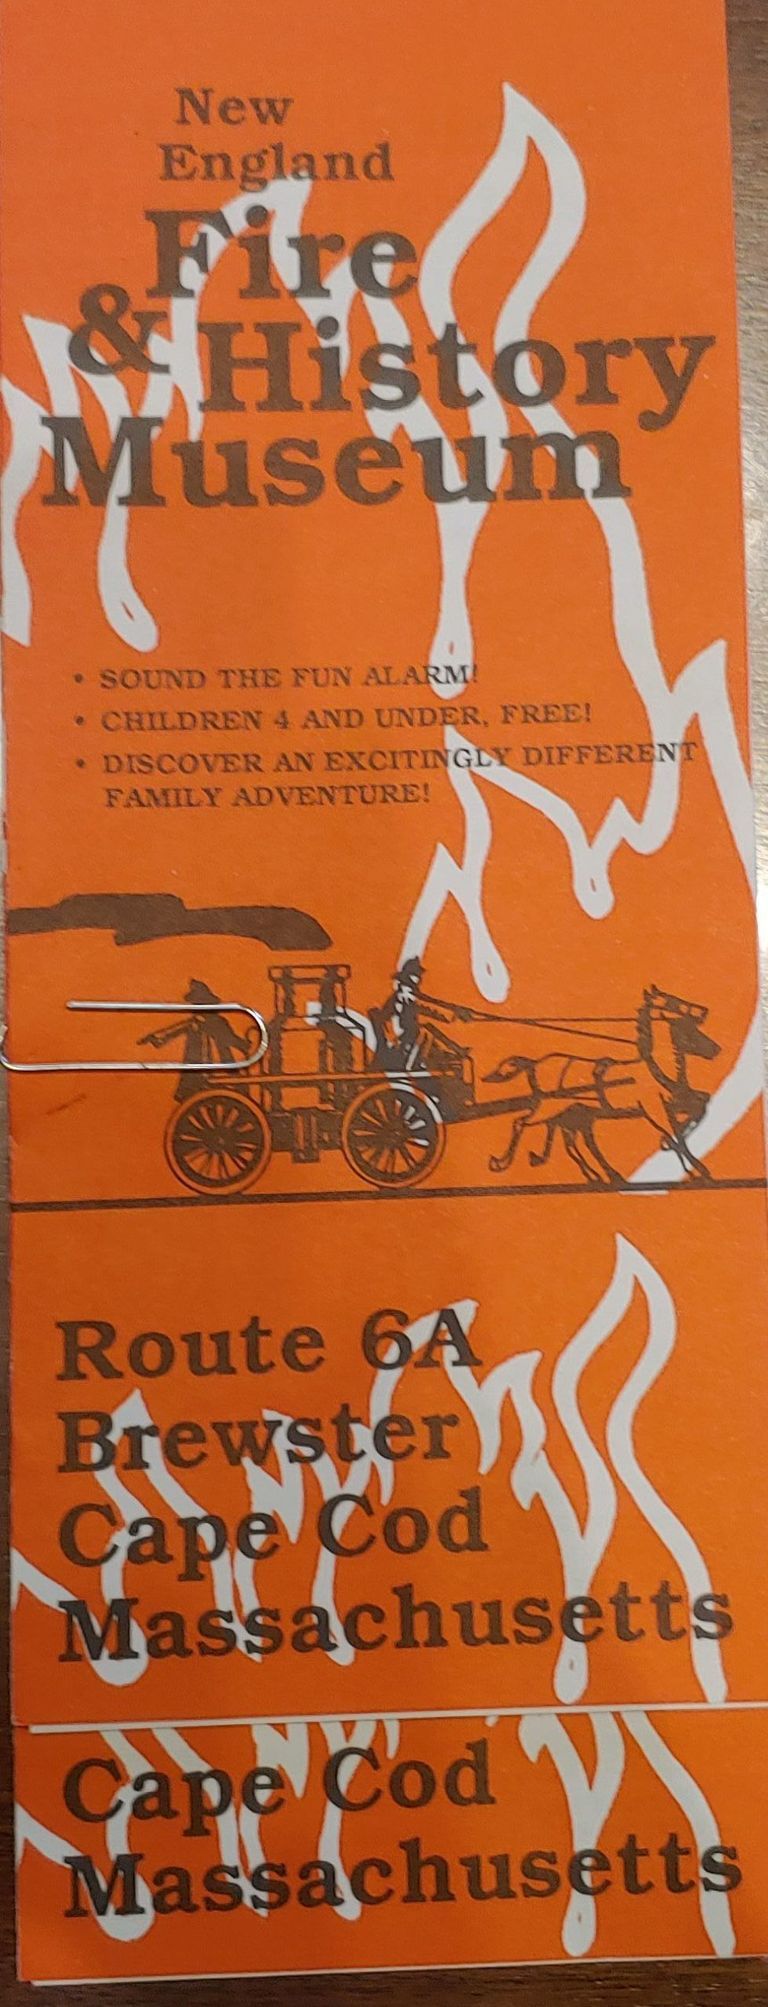          Fire Department: 2 advertisement pamphlets of the New England Fire and History Museum picture number 1
   